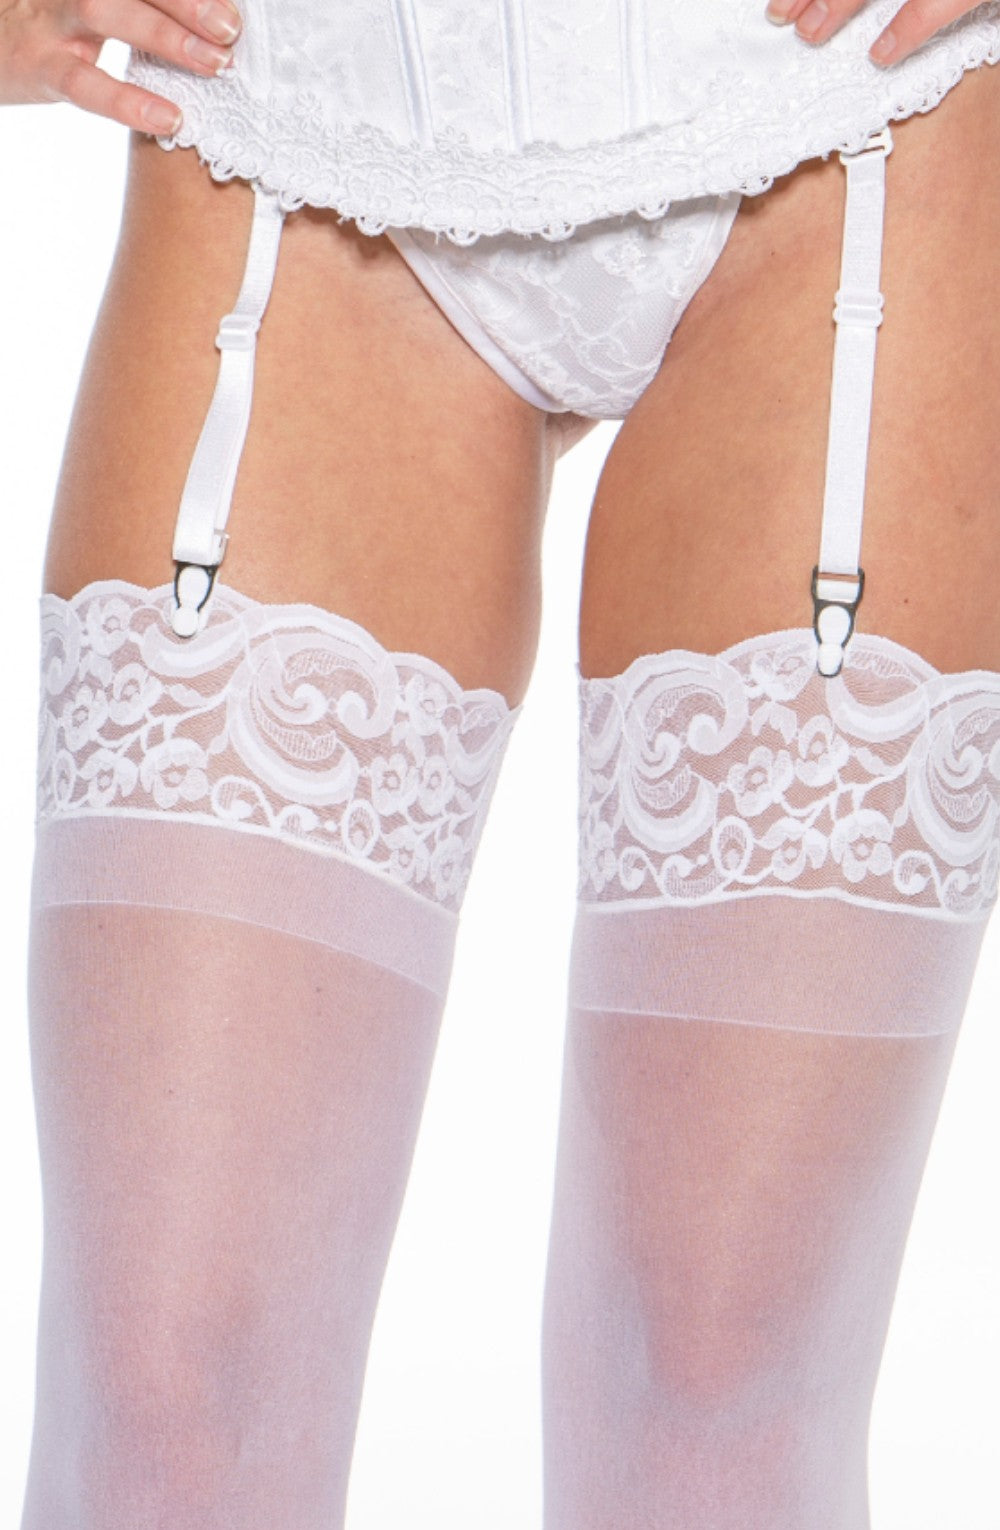 Shirley of Hollywood 90026 Lace Top Stockings White